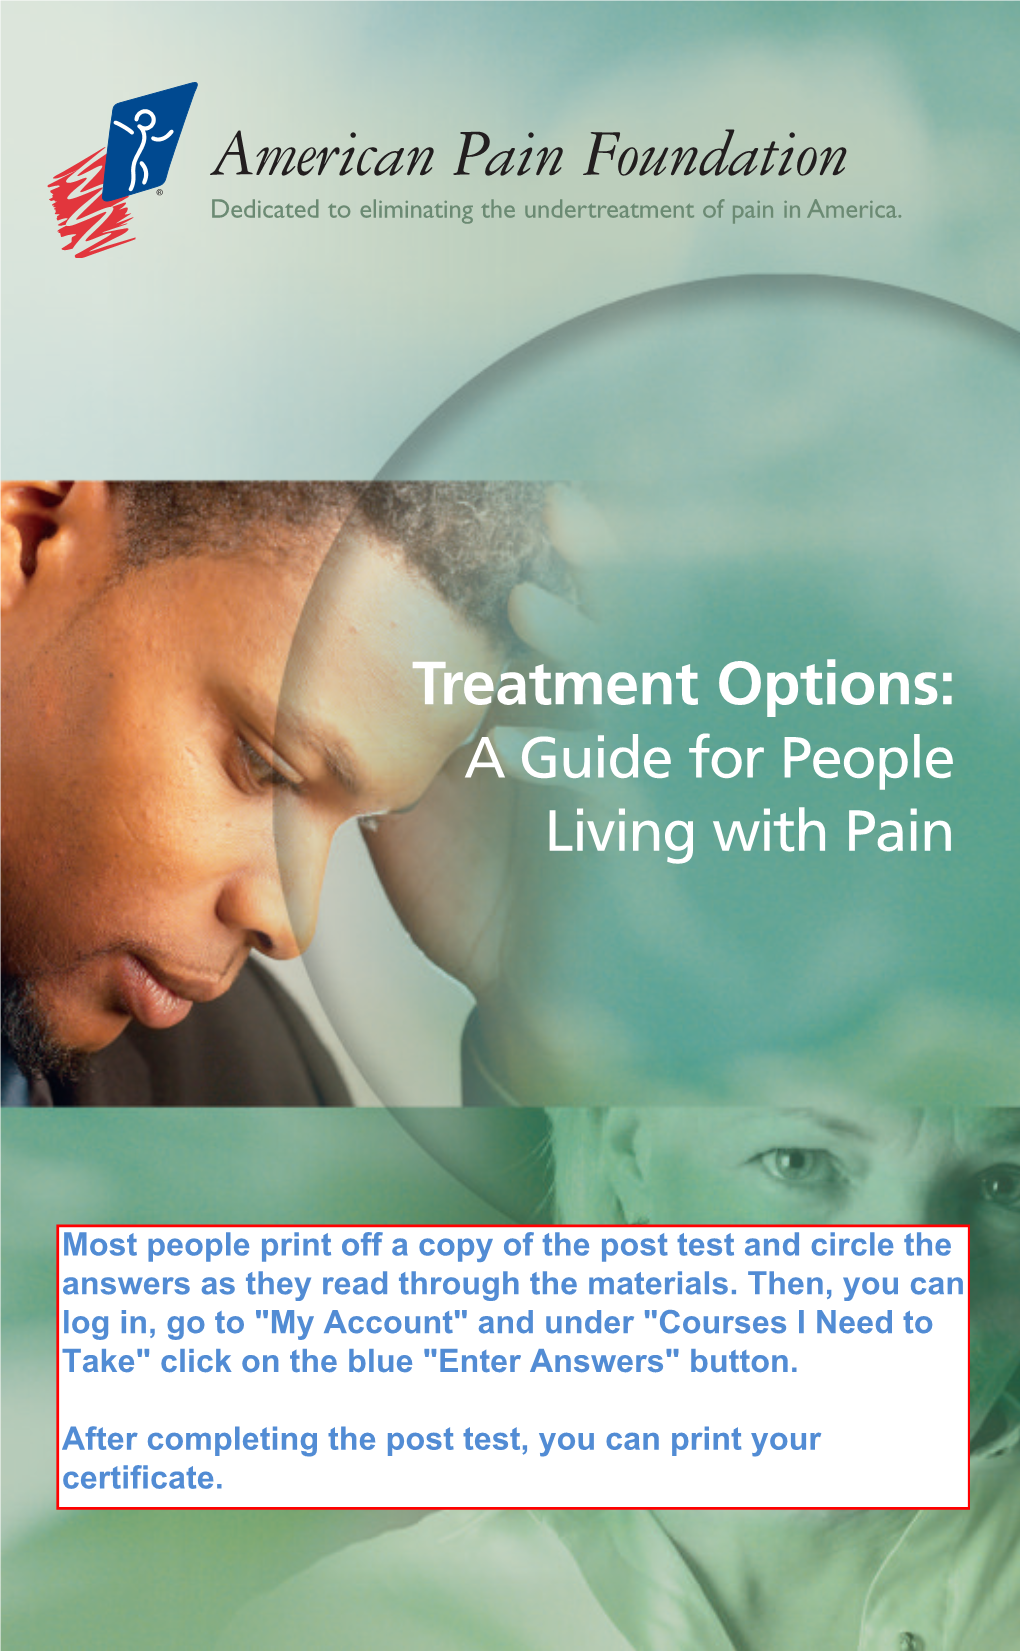 American Pain Foundation Dedicated to Eliminating the Undertreatment of Pain in America